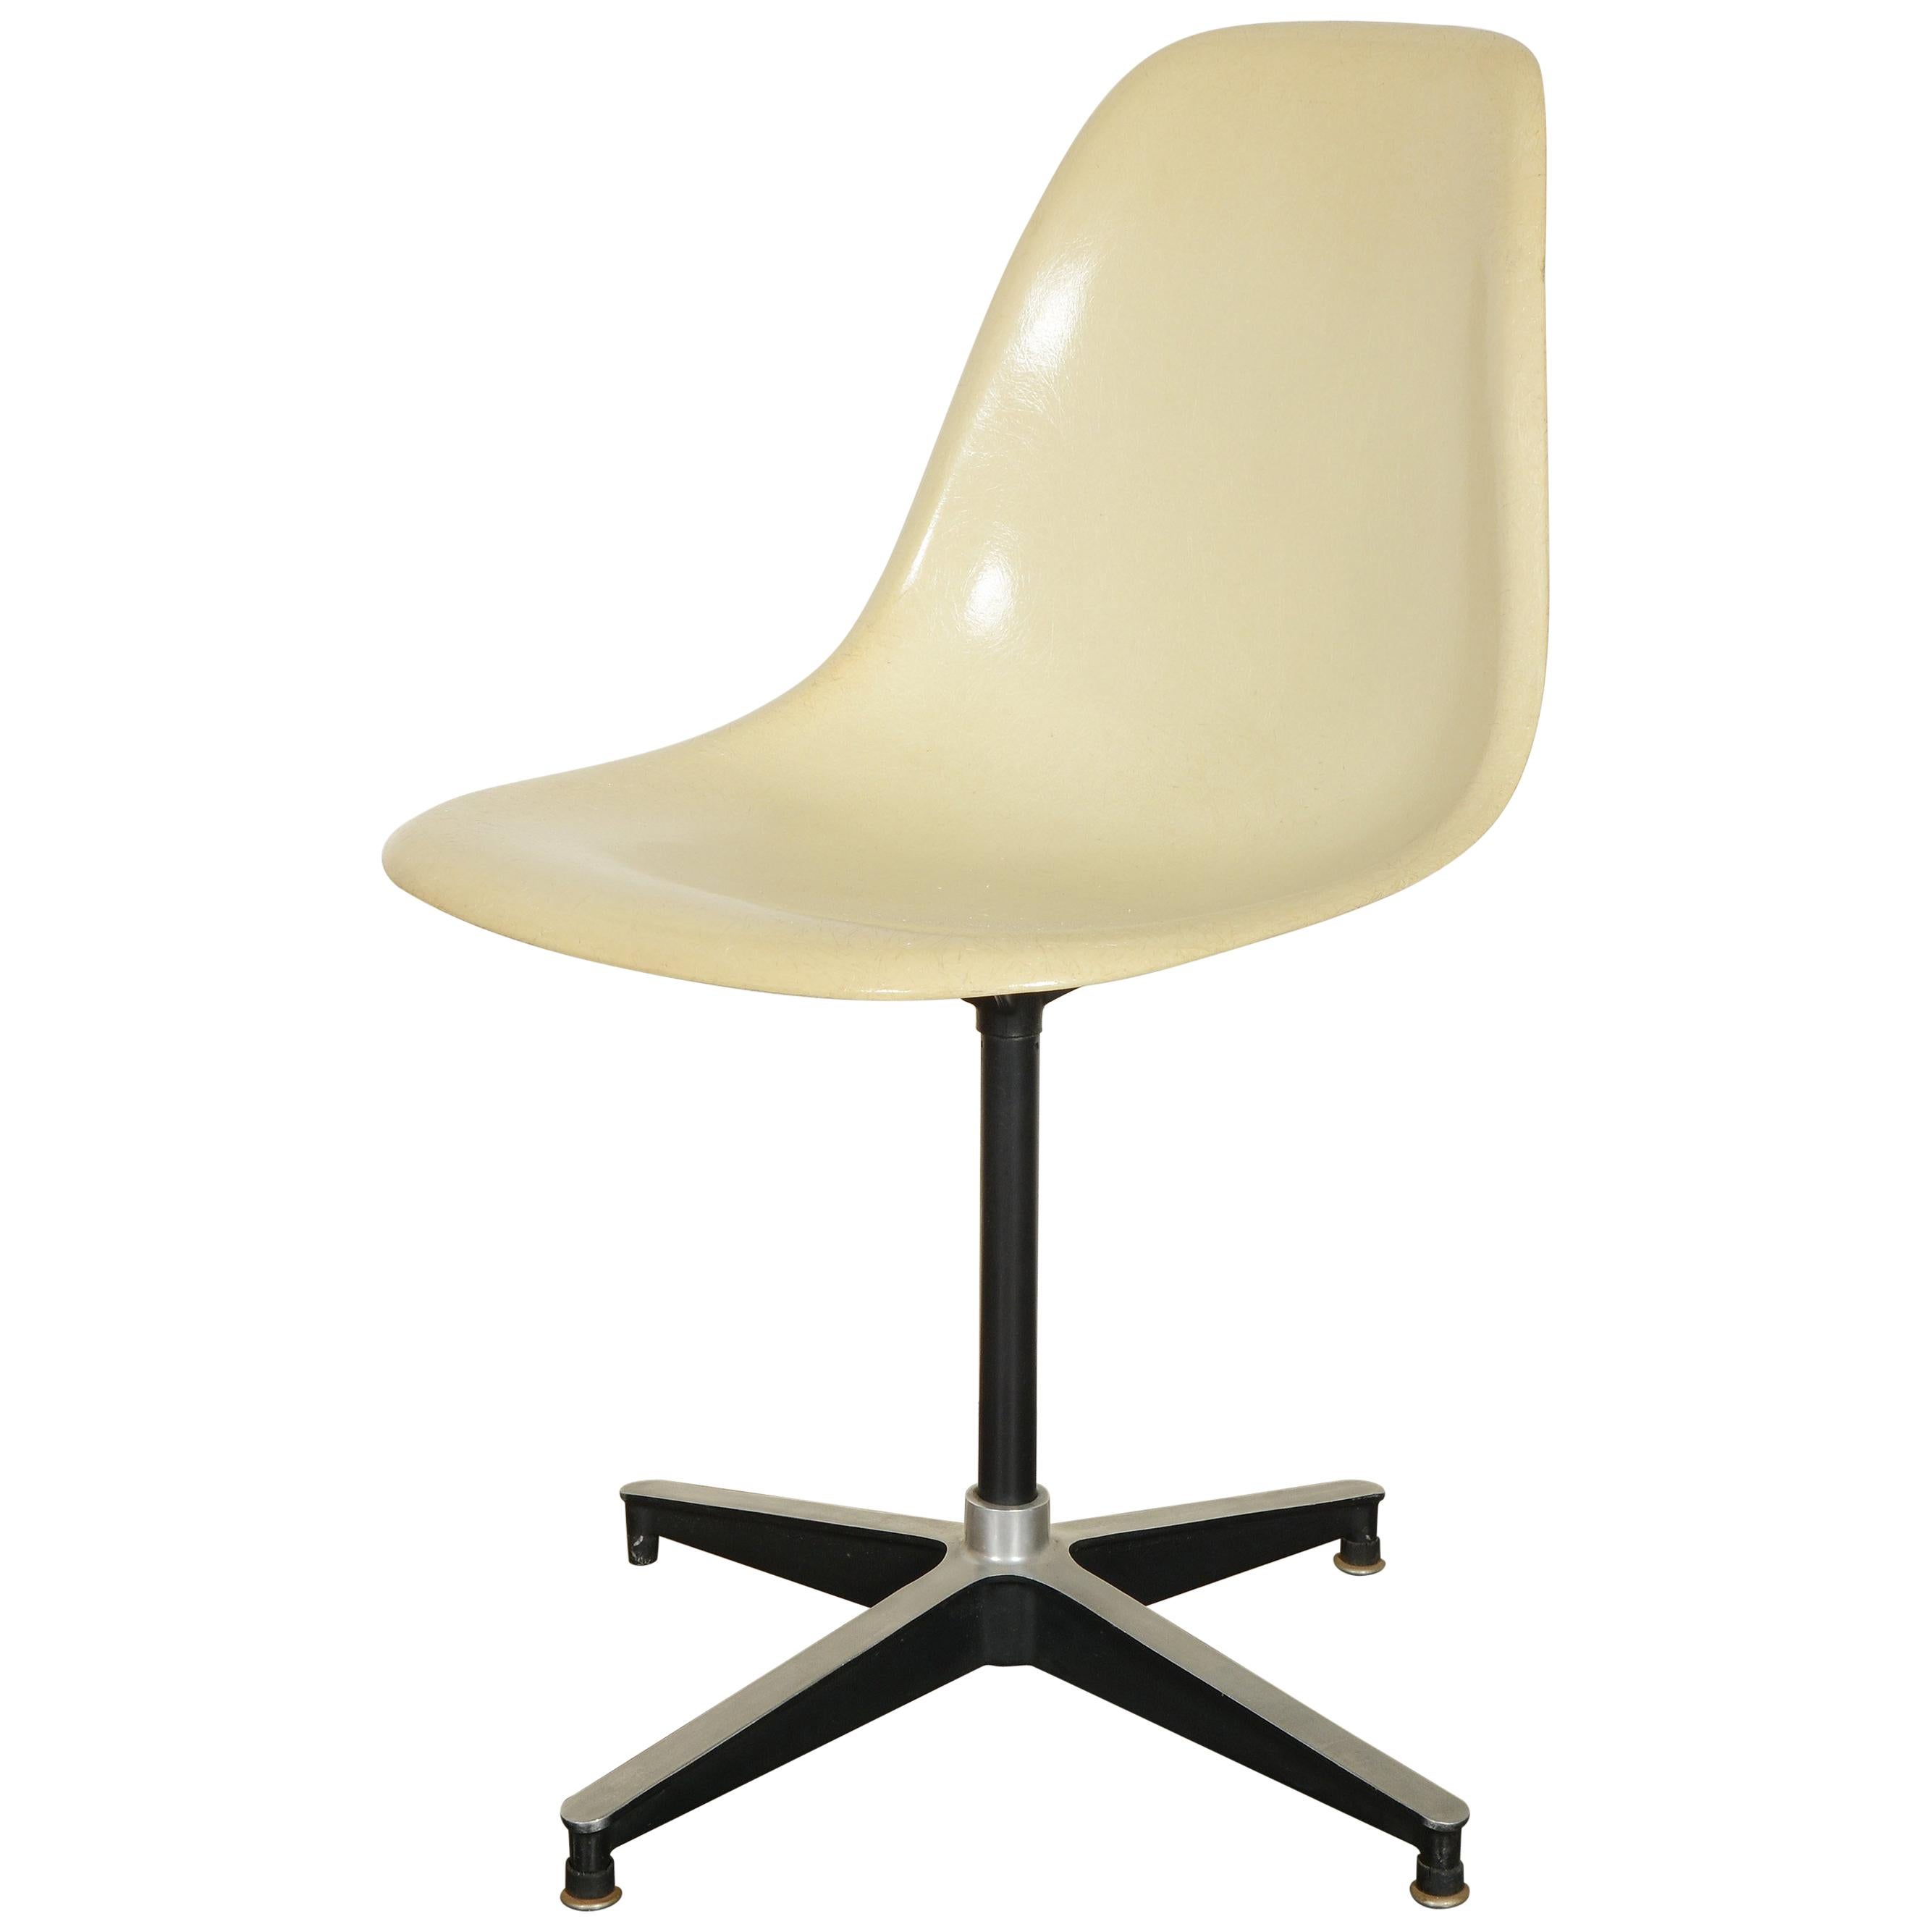 Charles and Ray Eames PSC Swivel Fiberglass Chair with 671 Base